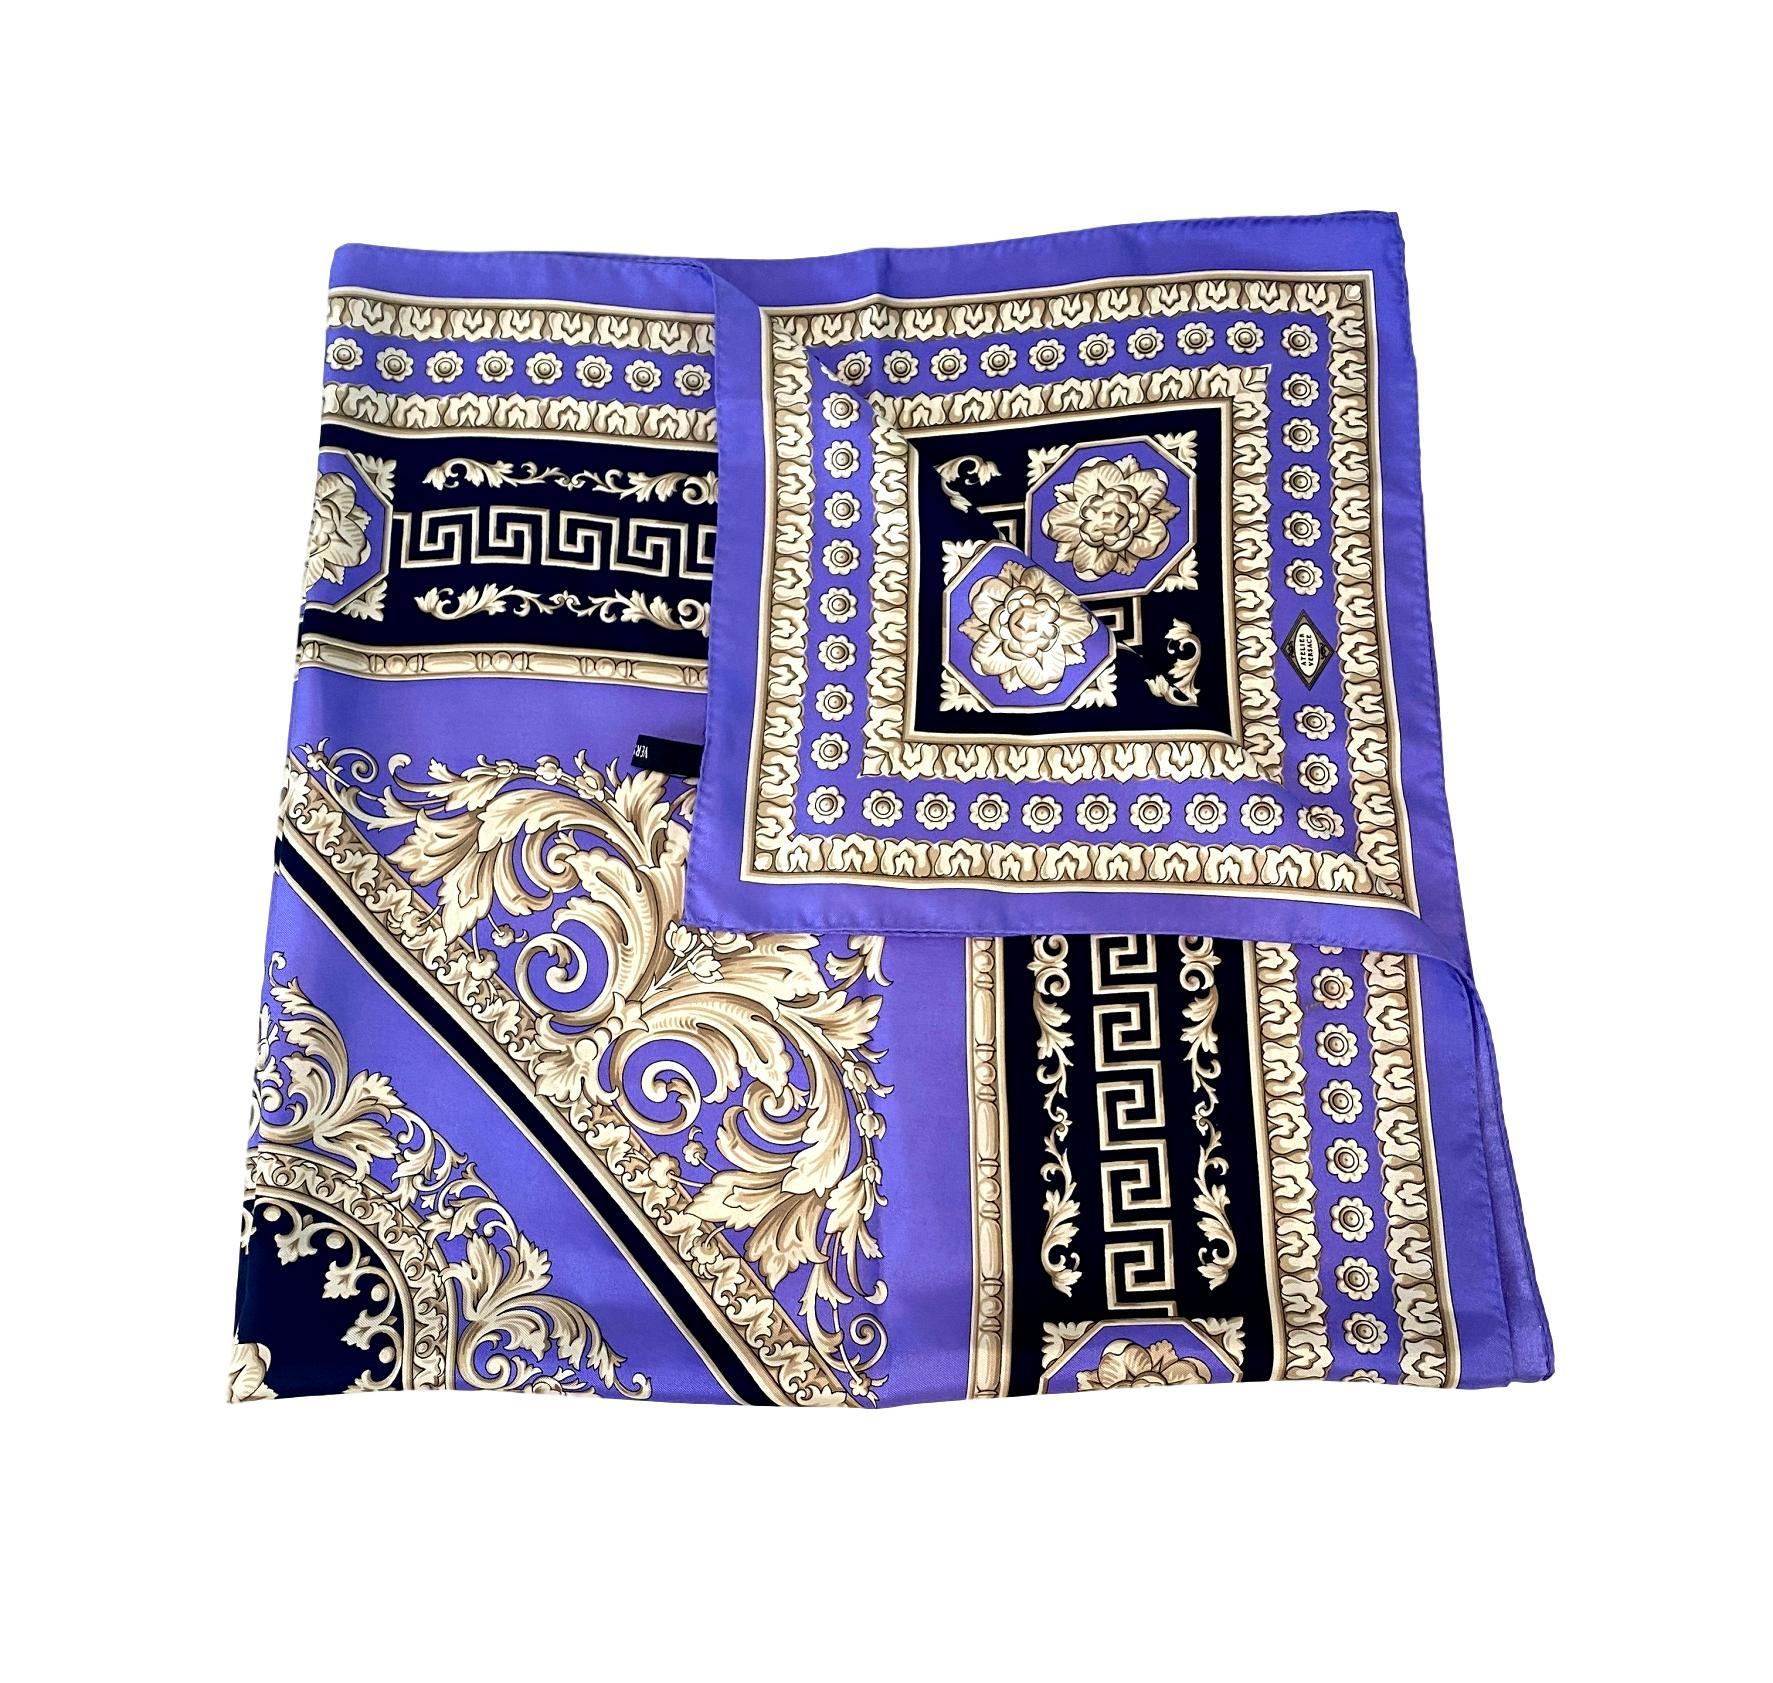 Atelier Versace Purple and Black Floral Ganymede Print Silk Twill Scarf by Versace circa 1994. Established in 1978, Gianni Versace became well known world wide for his use of bold and bright prints inspired and designed around ancient Greek